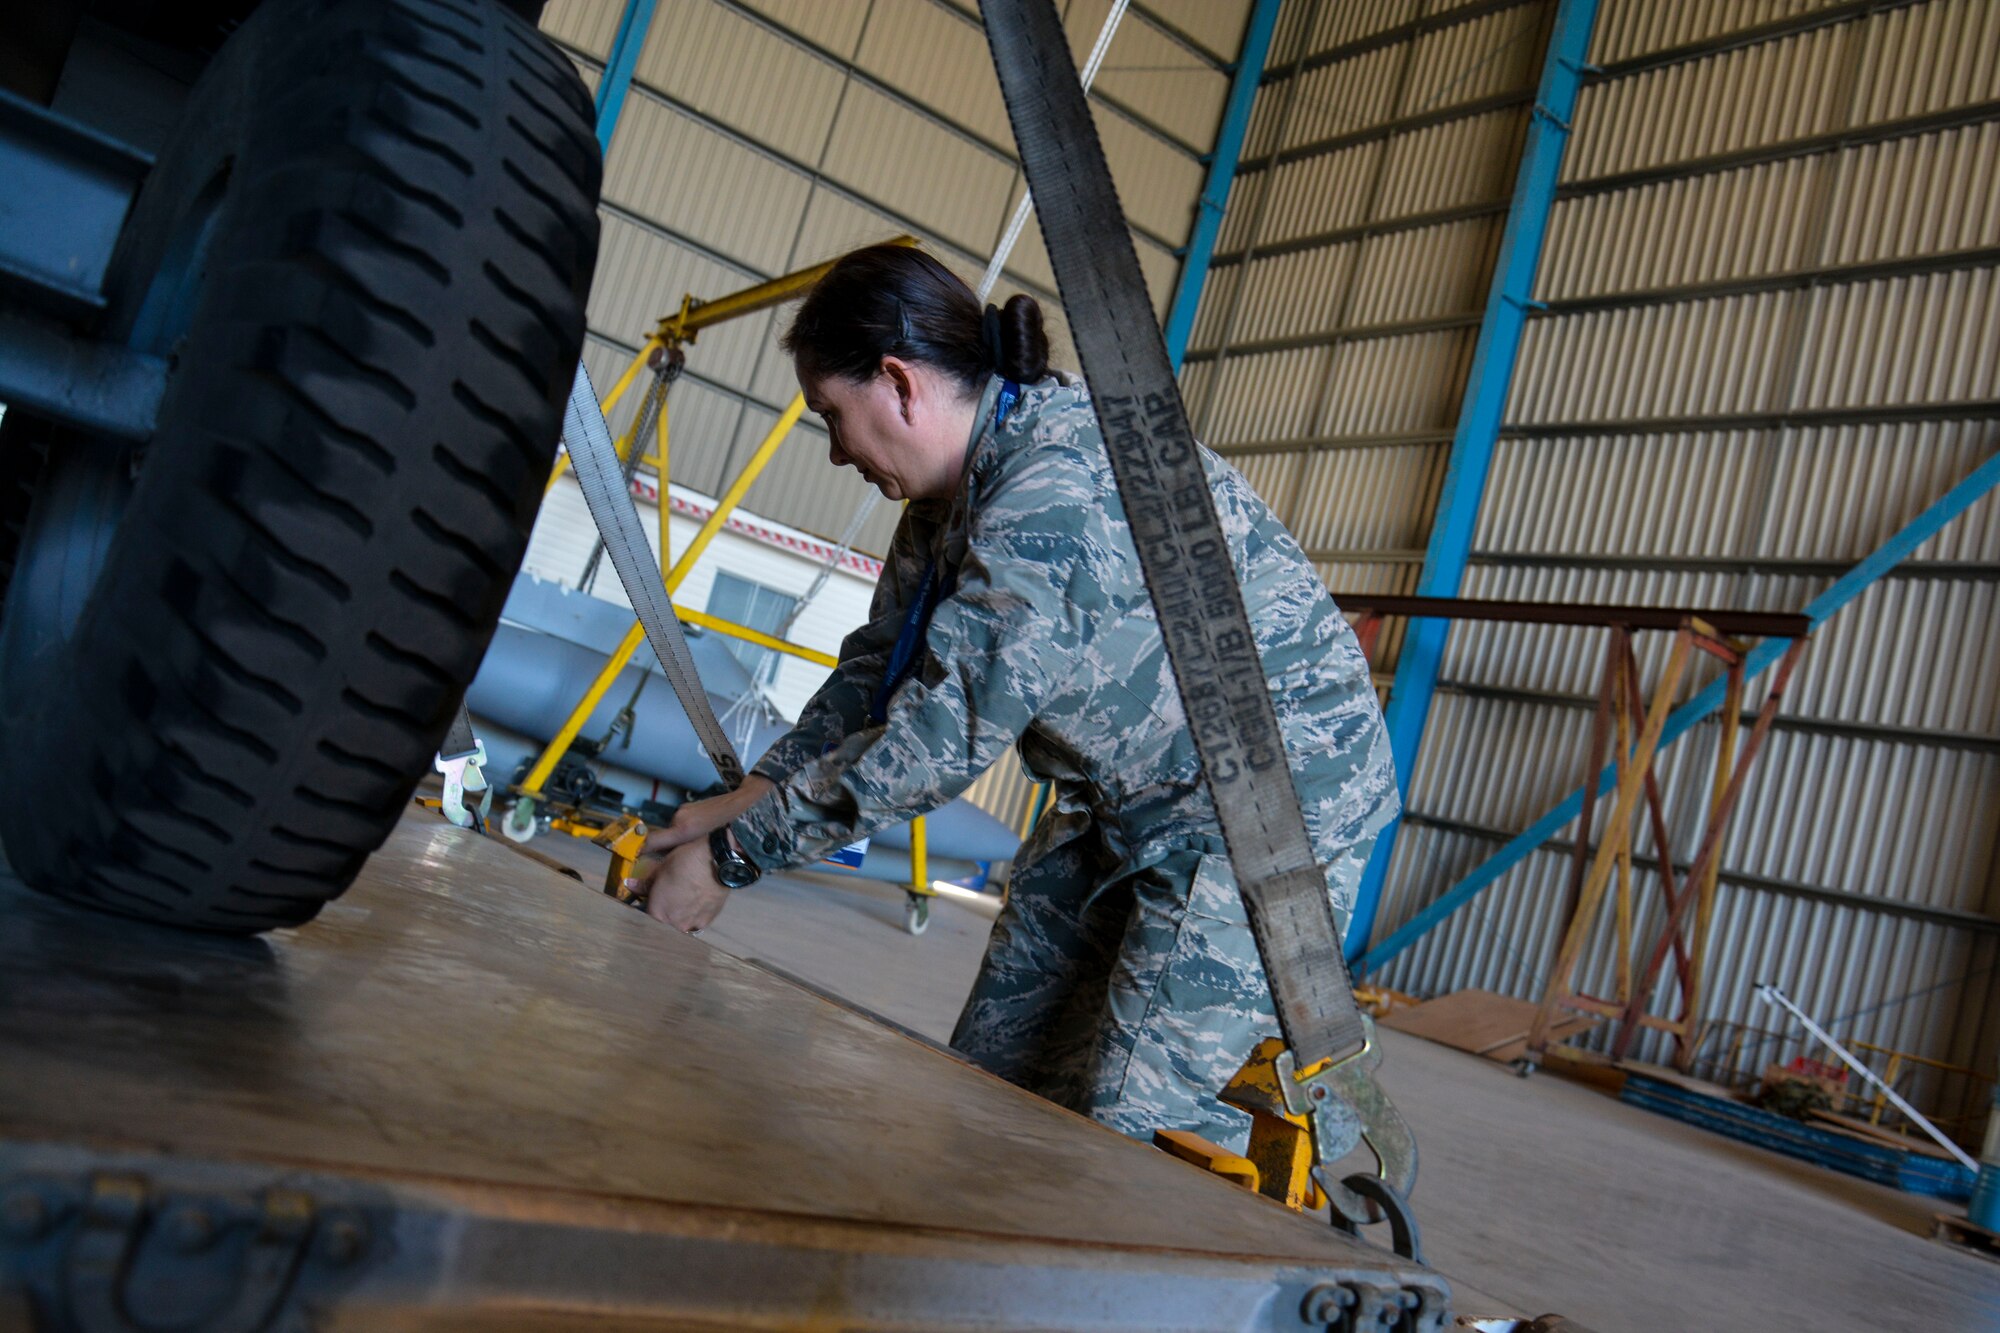 Major Camille LaDrew, a logistics officer from the Texas Air National Guard, ties down F-16 engine equipment and tools in Santiago, Chile, March 24.  Major LaDrew is one of nearly 60 U.S. Airmen participating in subject matter expert exchanges with Chilean air force counterparts, and involved in hosting static displays of the C-130 Hercules and F-16 Fighting Falcon during the FIDAE Air Show in Santiago, March 25 through 30. The exchanges, conducted regularly throughout the year, involve U.S. Airmen sharing best practices and procedures to build partnerships and promote interoperability with partner-nations throughout South America, Central America and the Caribbean. (U.S. Air Force photo by Capt. Justin Brockhoff/Released)